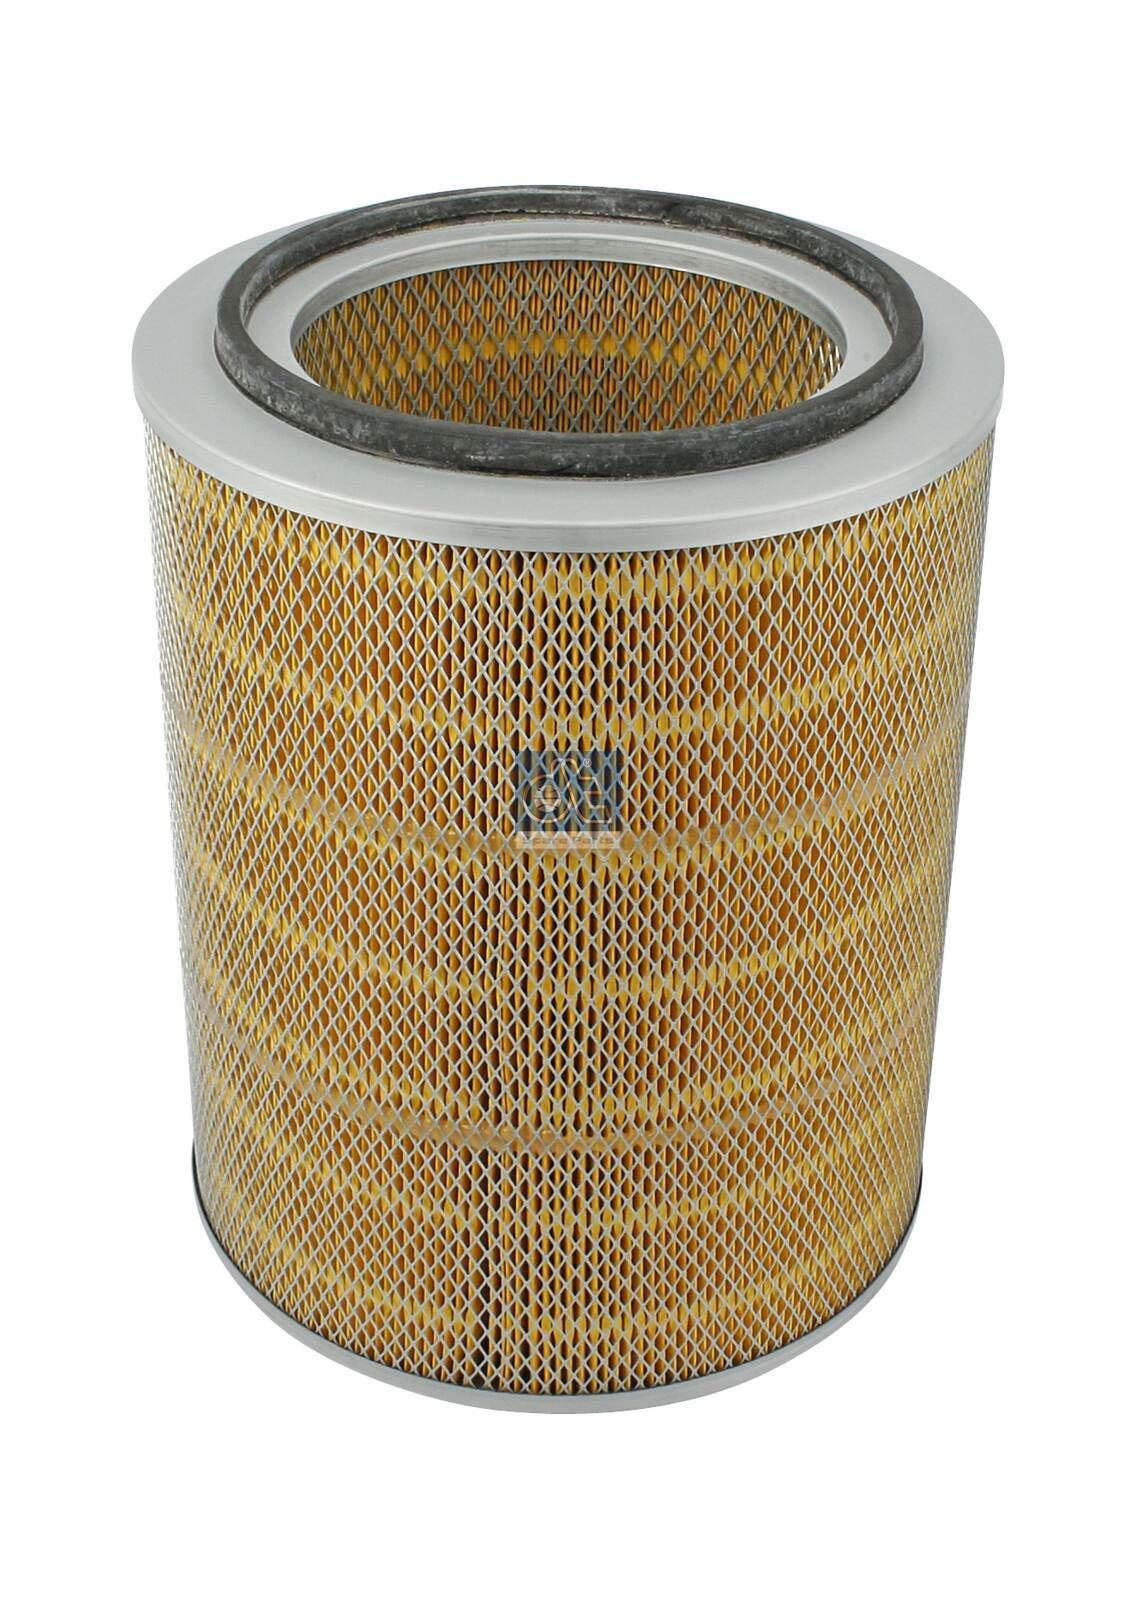 C 30 703 DT Spare Parts 380mm, 302mm, Filter Insert Height: 380mm Engine air filter 1.10301 buy